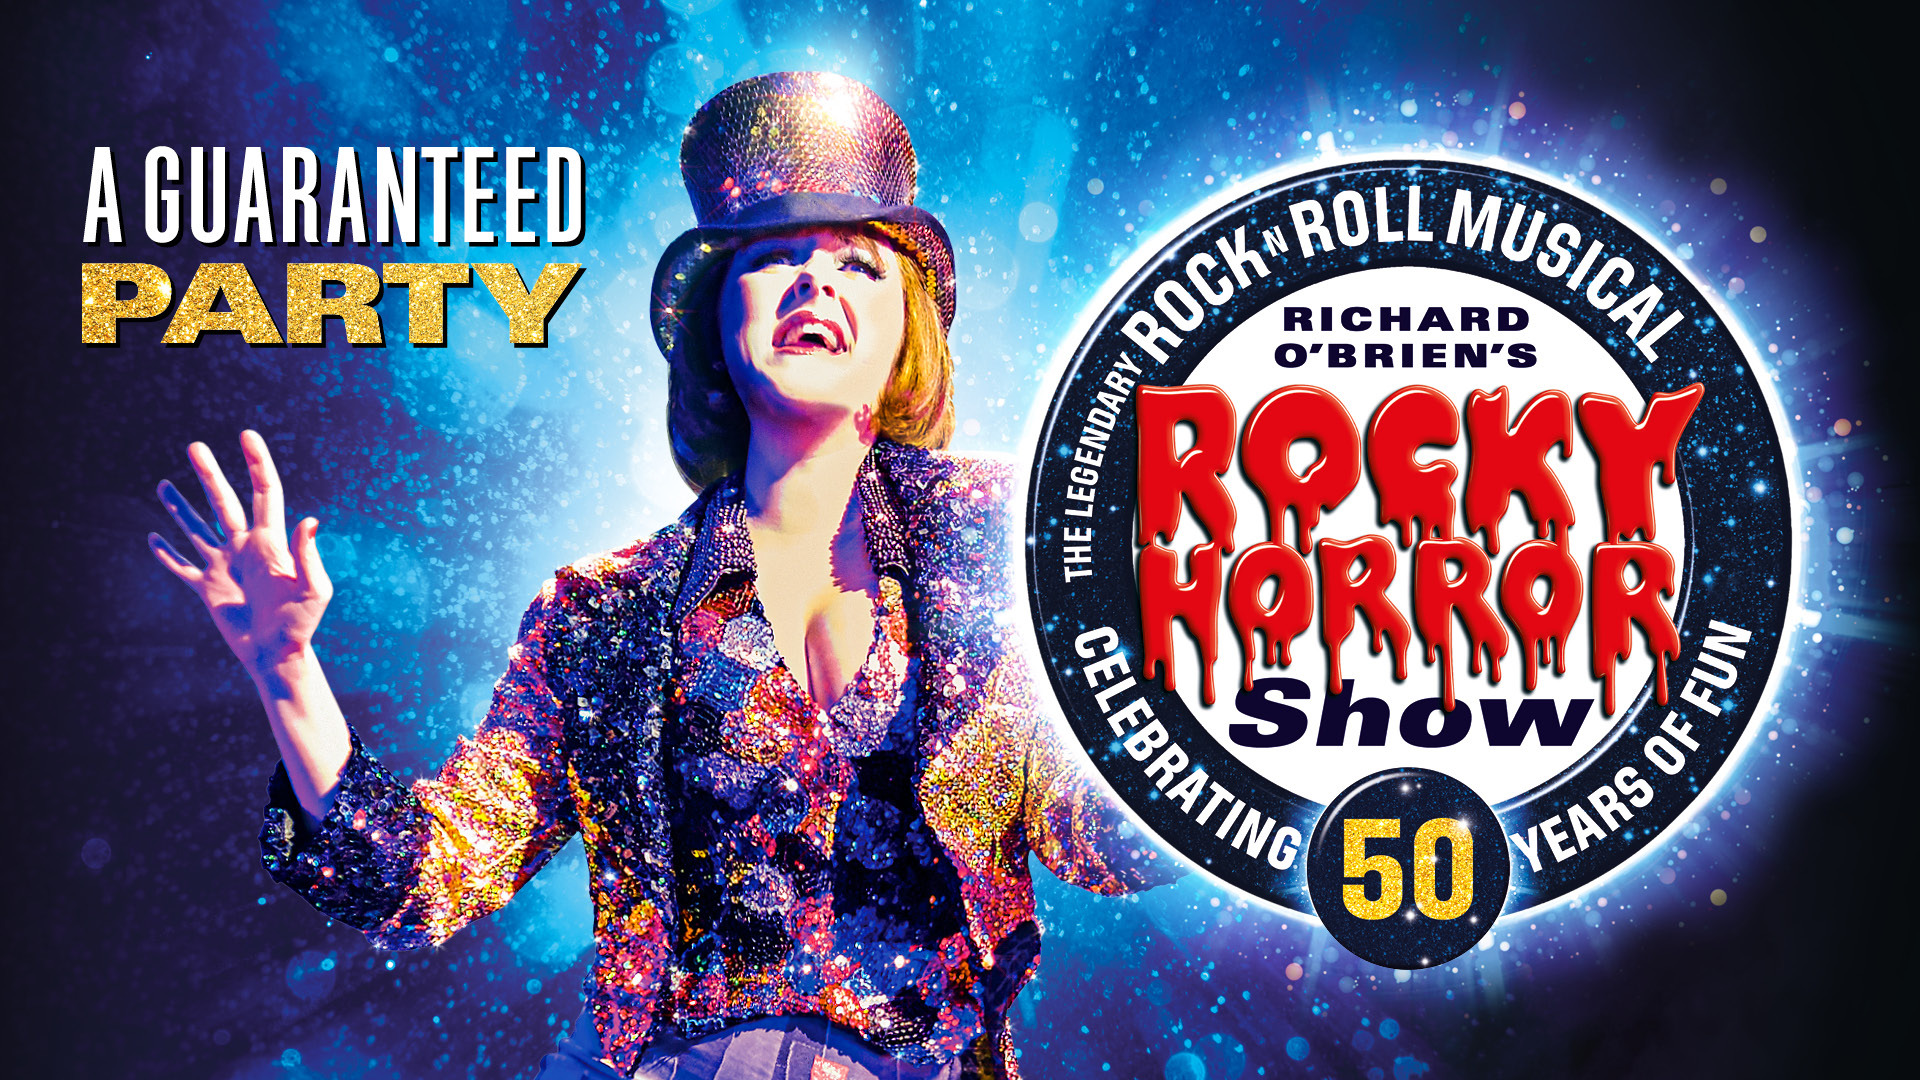 THE ROCKY HORROR SHOW CELEBRATES ITS 50th ANNIVERSARY – EXTENDING ITS WORLD TOUR THROUGH 2023